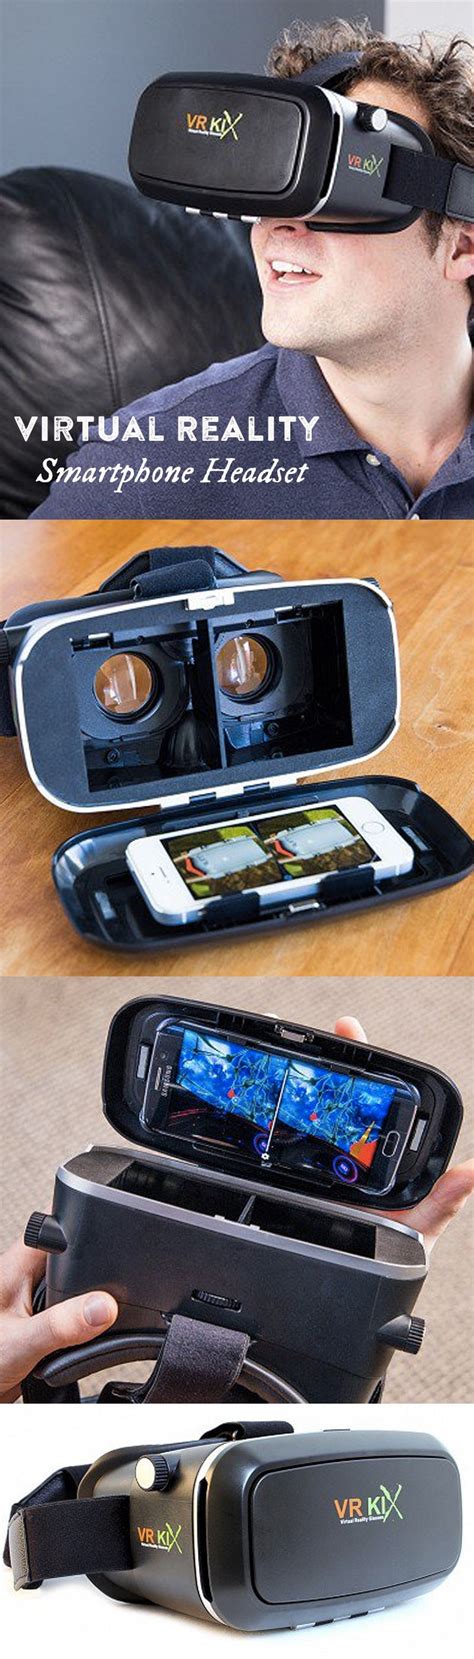 Virtual Reality Goggles for Smartphones by Vr KiX | Virtual reality goggles, Virtual reality ...